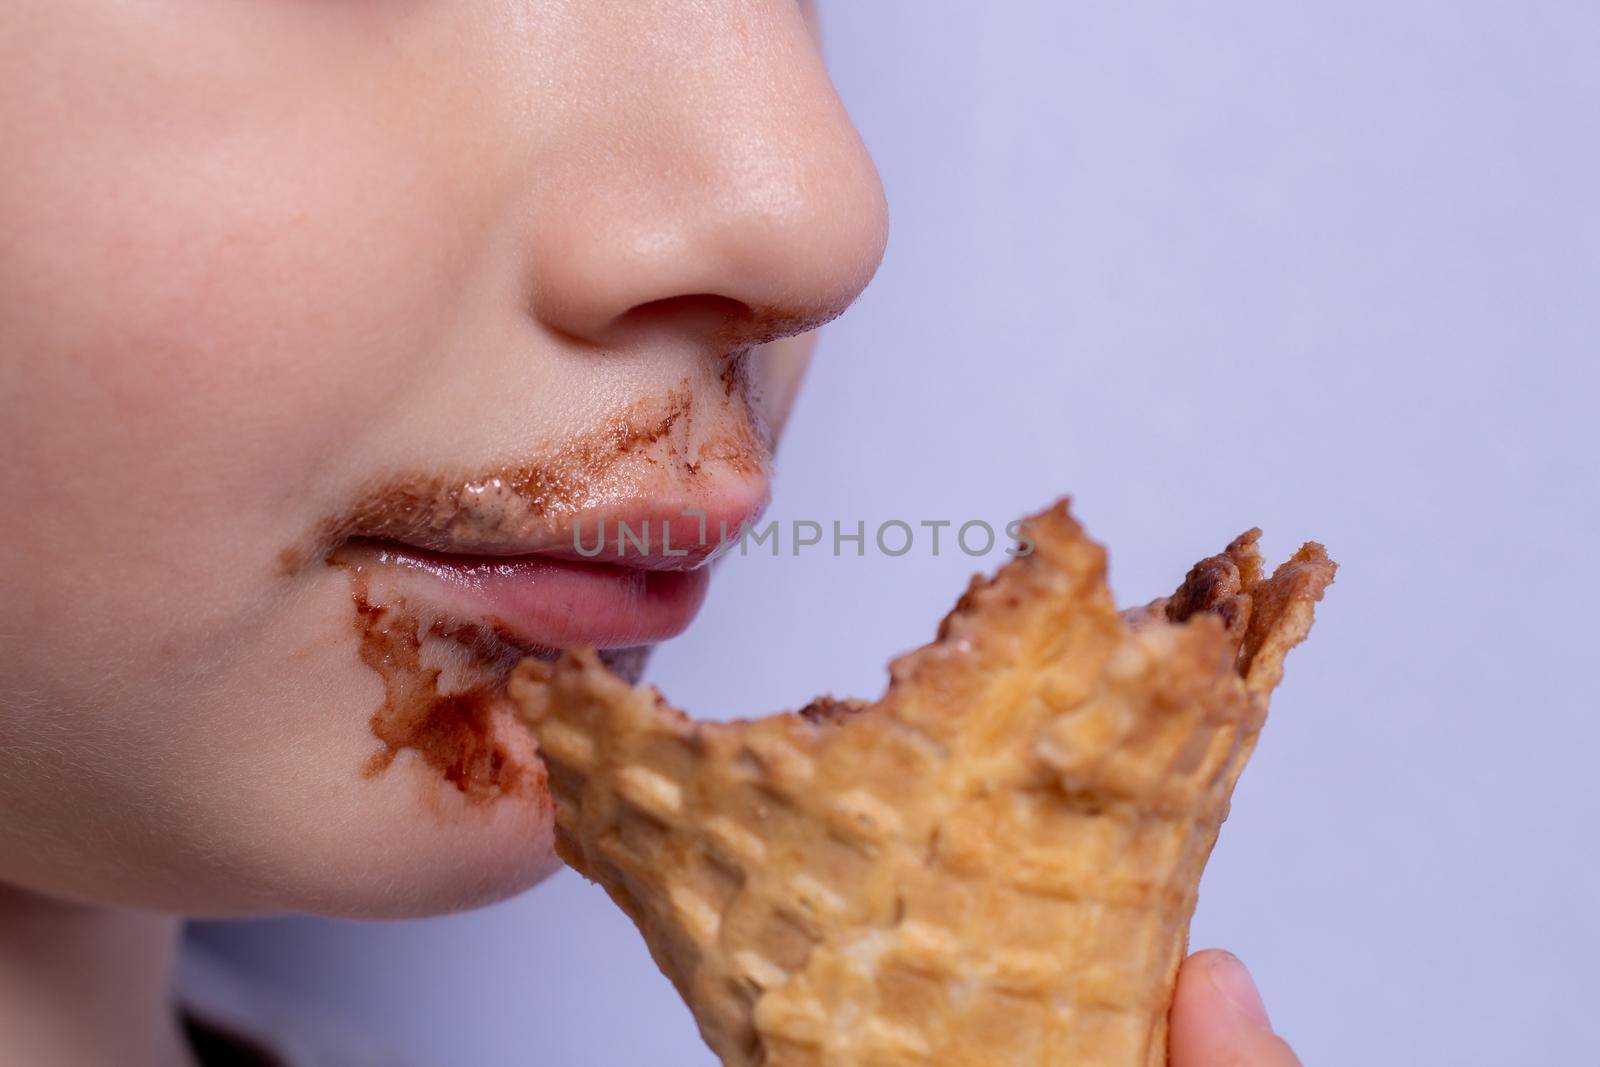 image of a boy sitting chocolate ice cream, smeared mouth